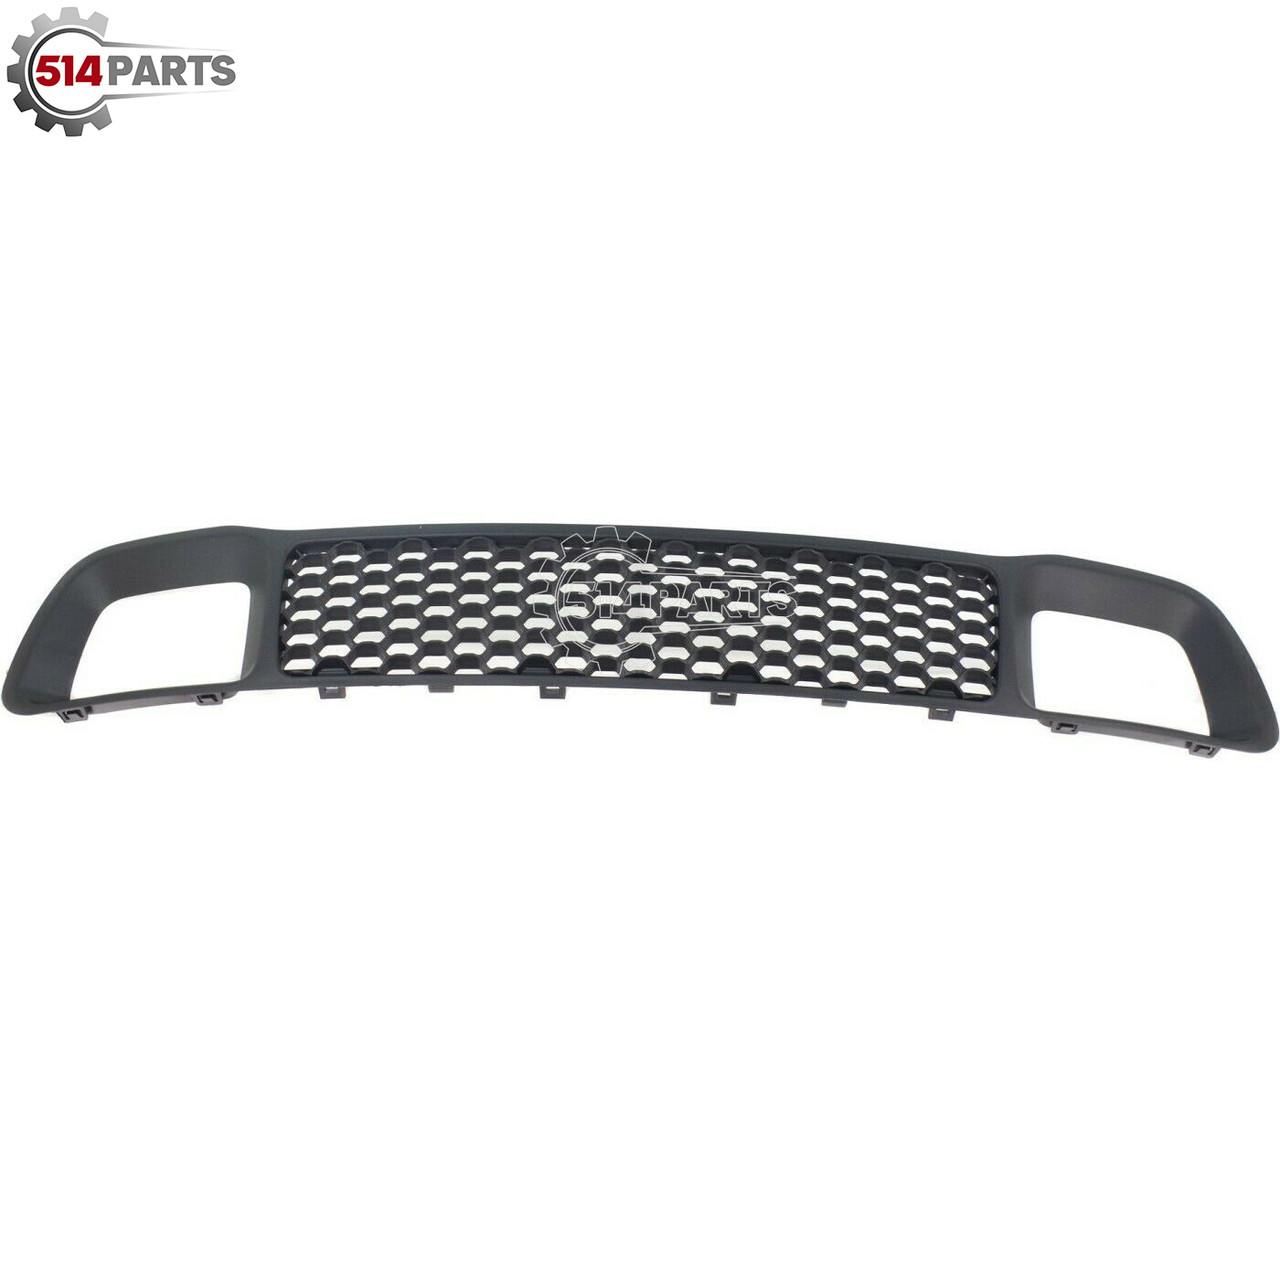 2014 - 2015 JEEP GRAND CHEROKEE ALL MODELS EXC SRT-8 FRONT LOWER GRILLE without TOW HOOK without ADAPTIVE CRUISE CONTROL - CALANDRE INFERIEUR pour PARE-CHOCS INFERIEUR AVANT